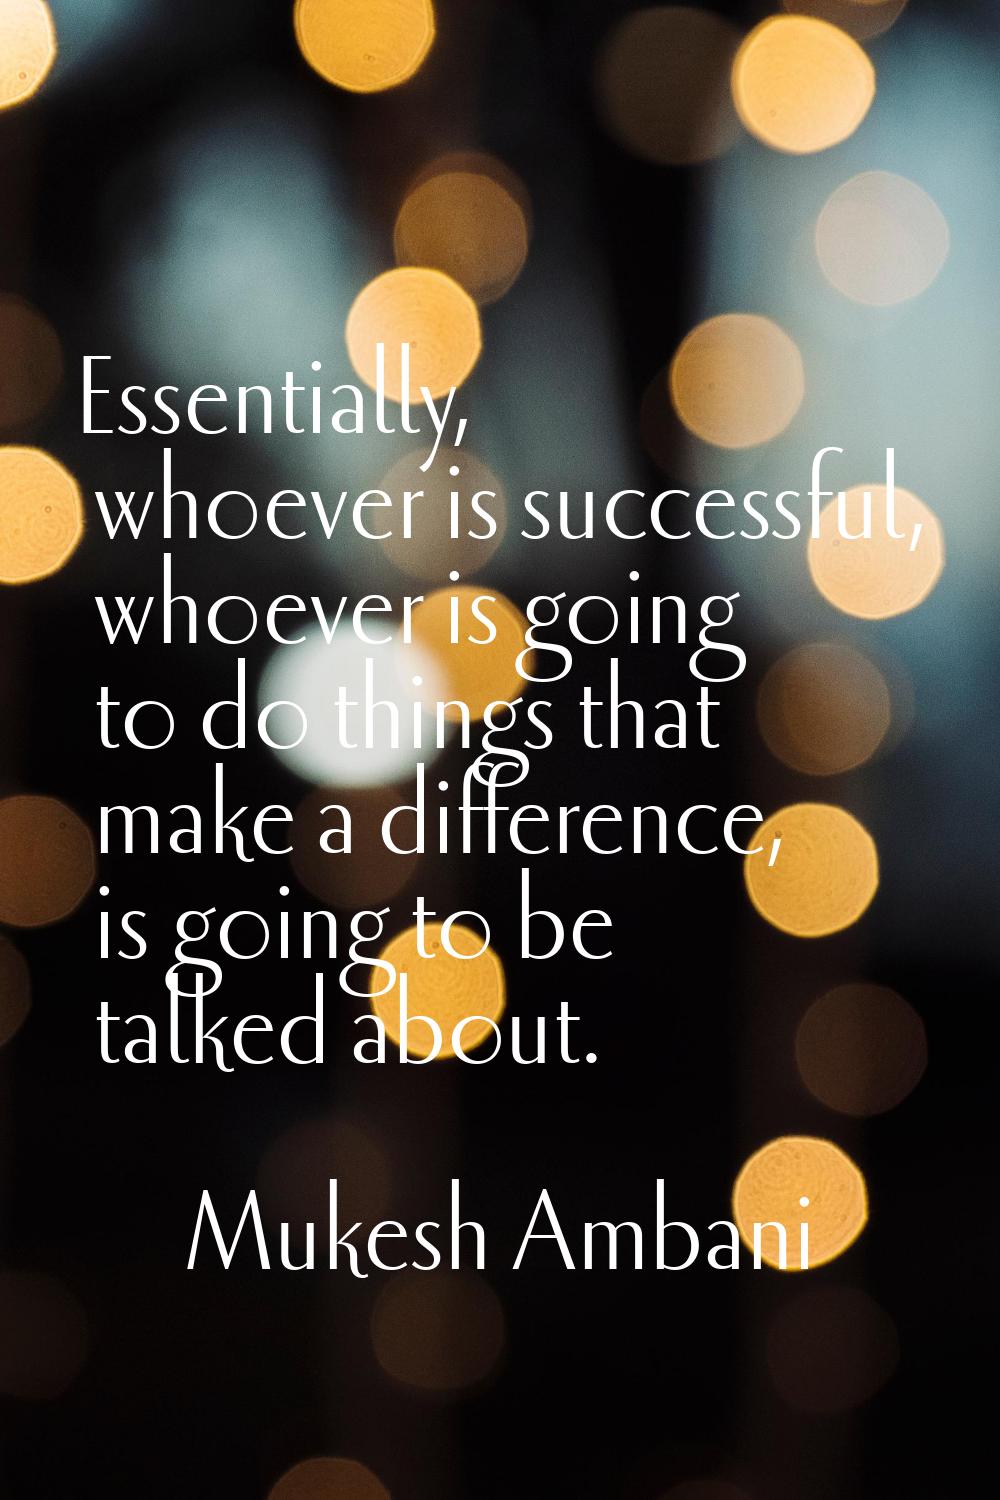 Essentially, whoever is successful, whoever is going to do things that make a difference, is going 